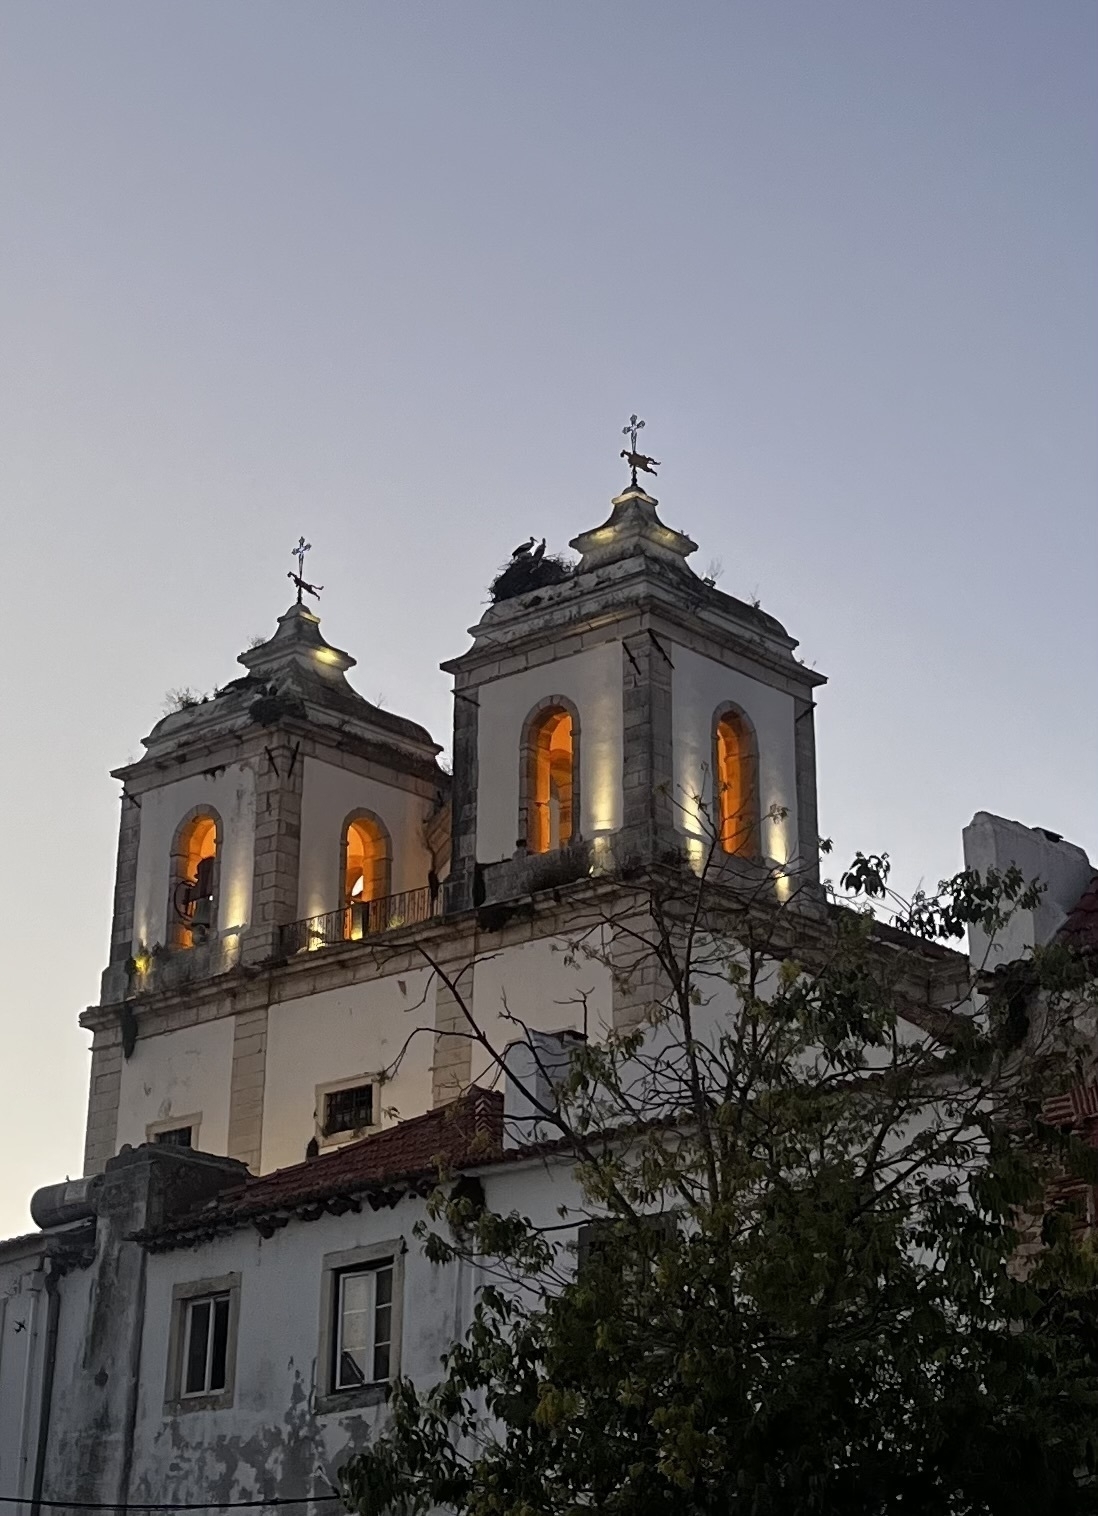 Two illuminated church bell towers at dusk with the silhouette of two storks on a nest on one of the towers.